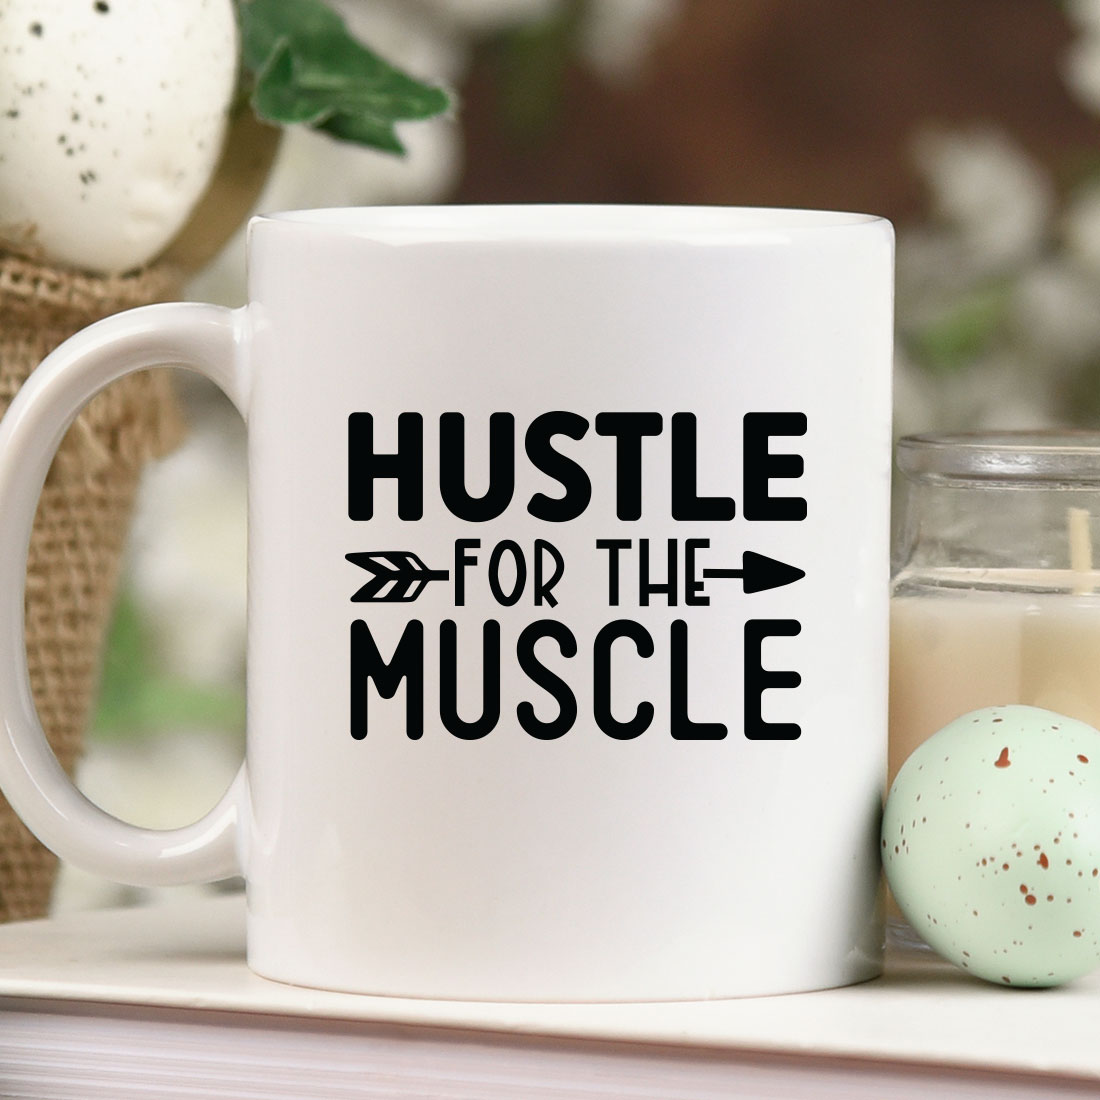 Coffee mug that says hustle for the muscle next to a candle.